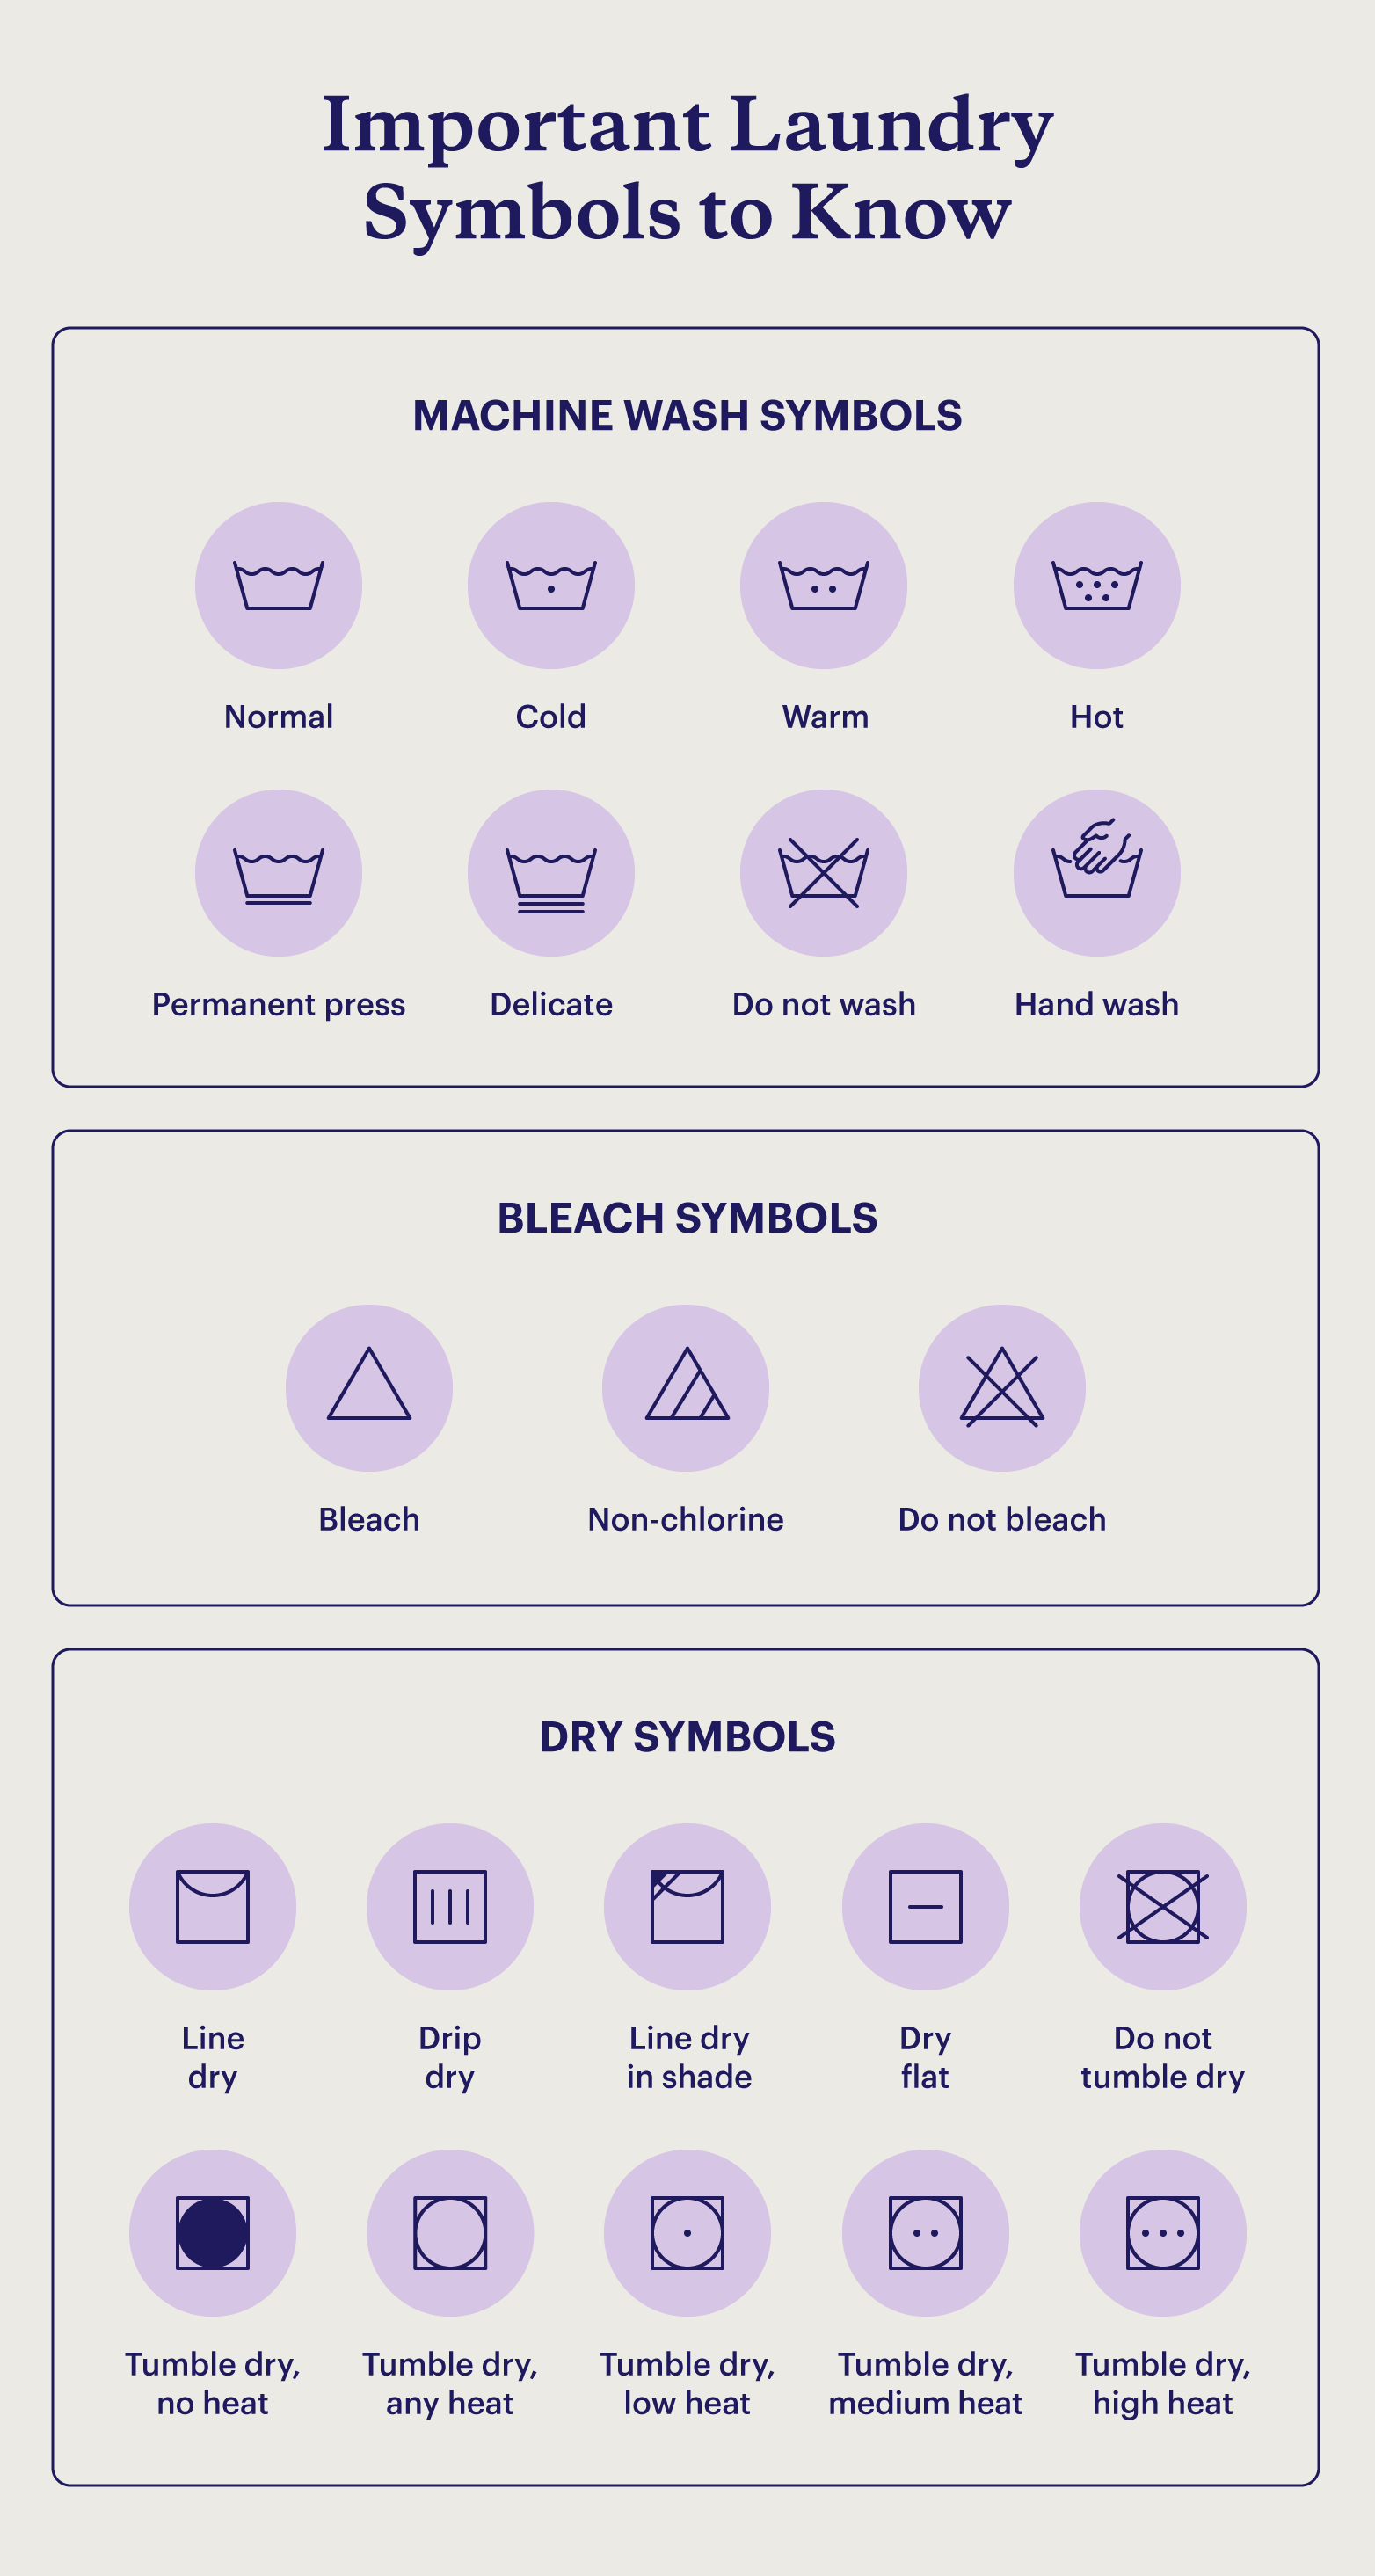 Graphic illustrating laundry symbols and what they mean.